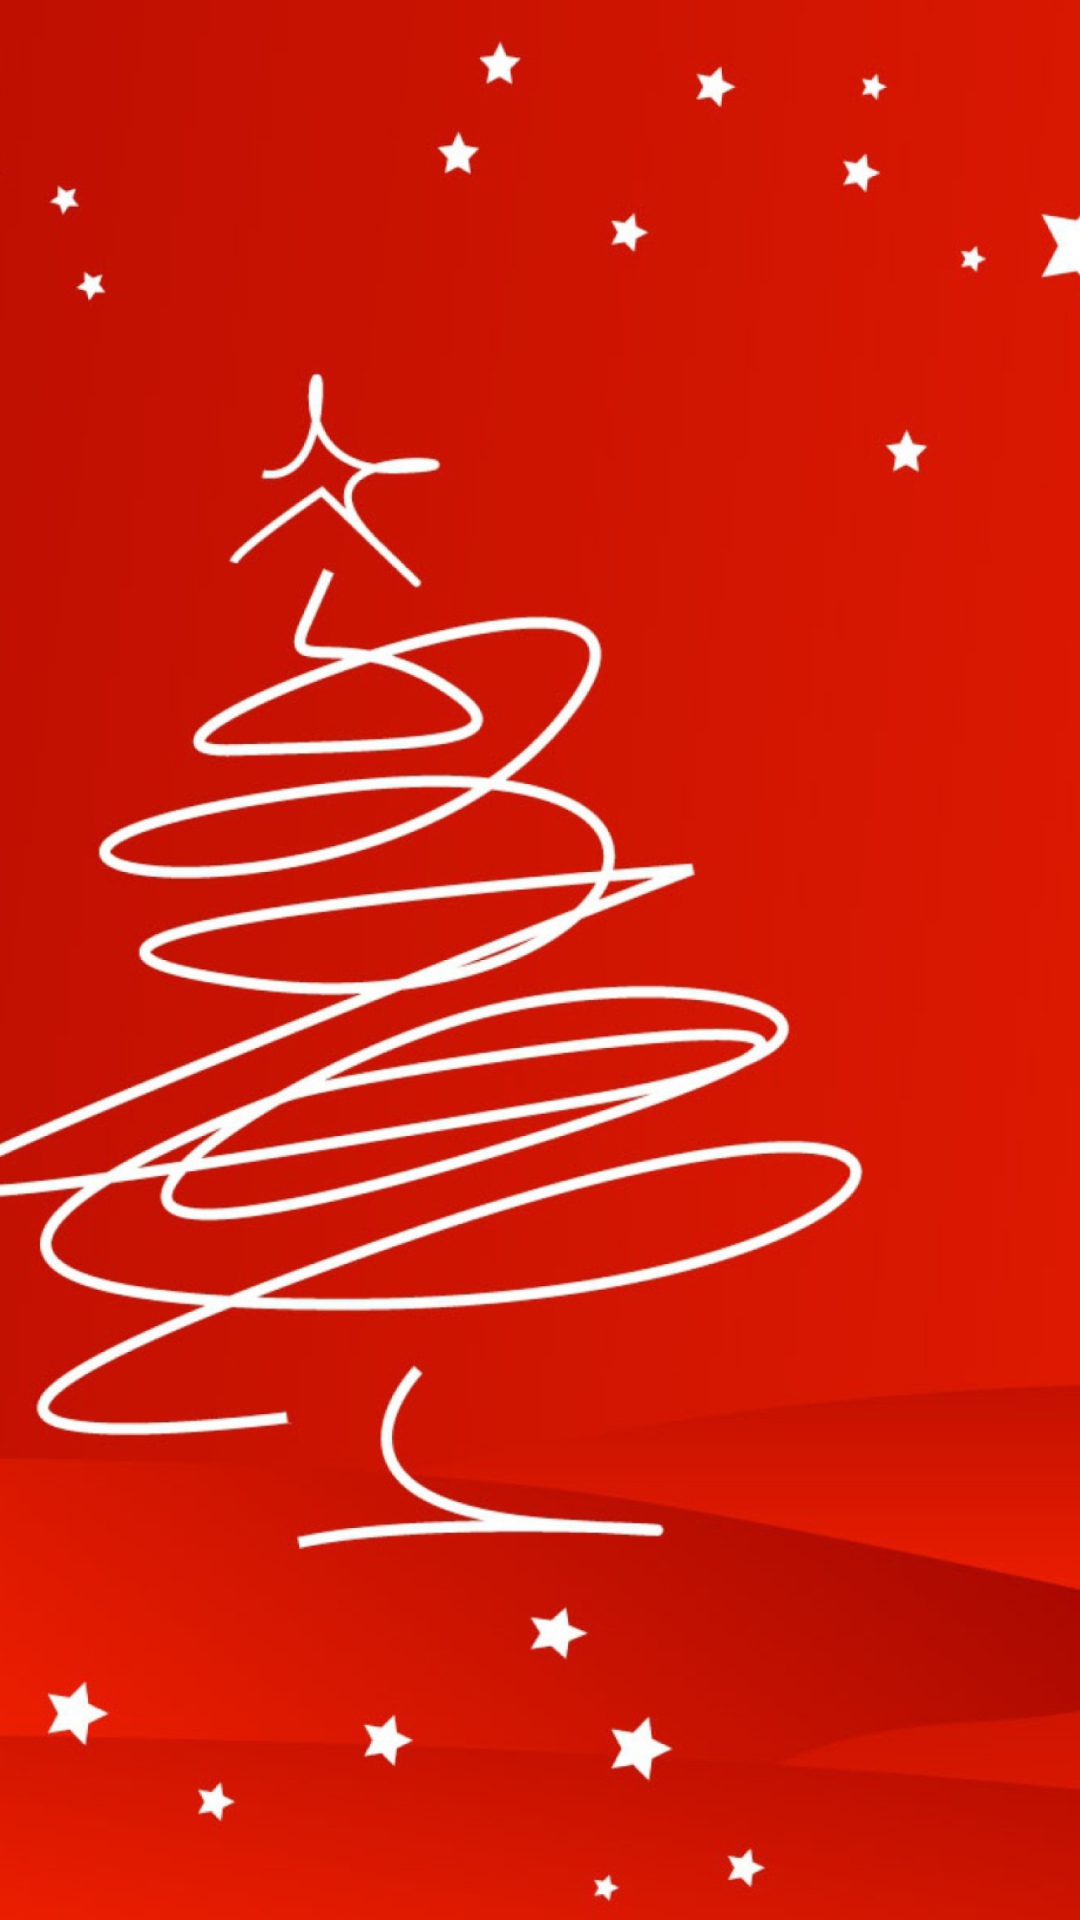 Merry Christmas Red wallpaper 1080x1920